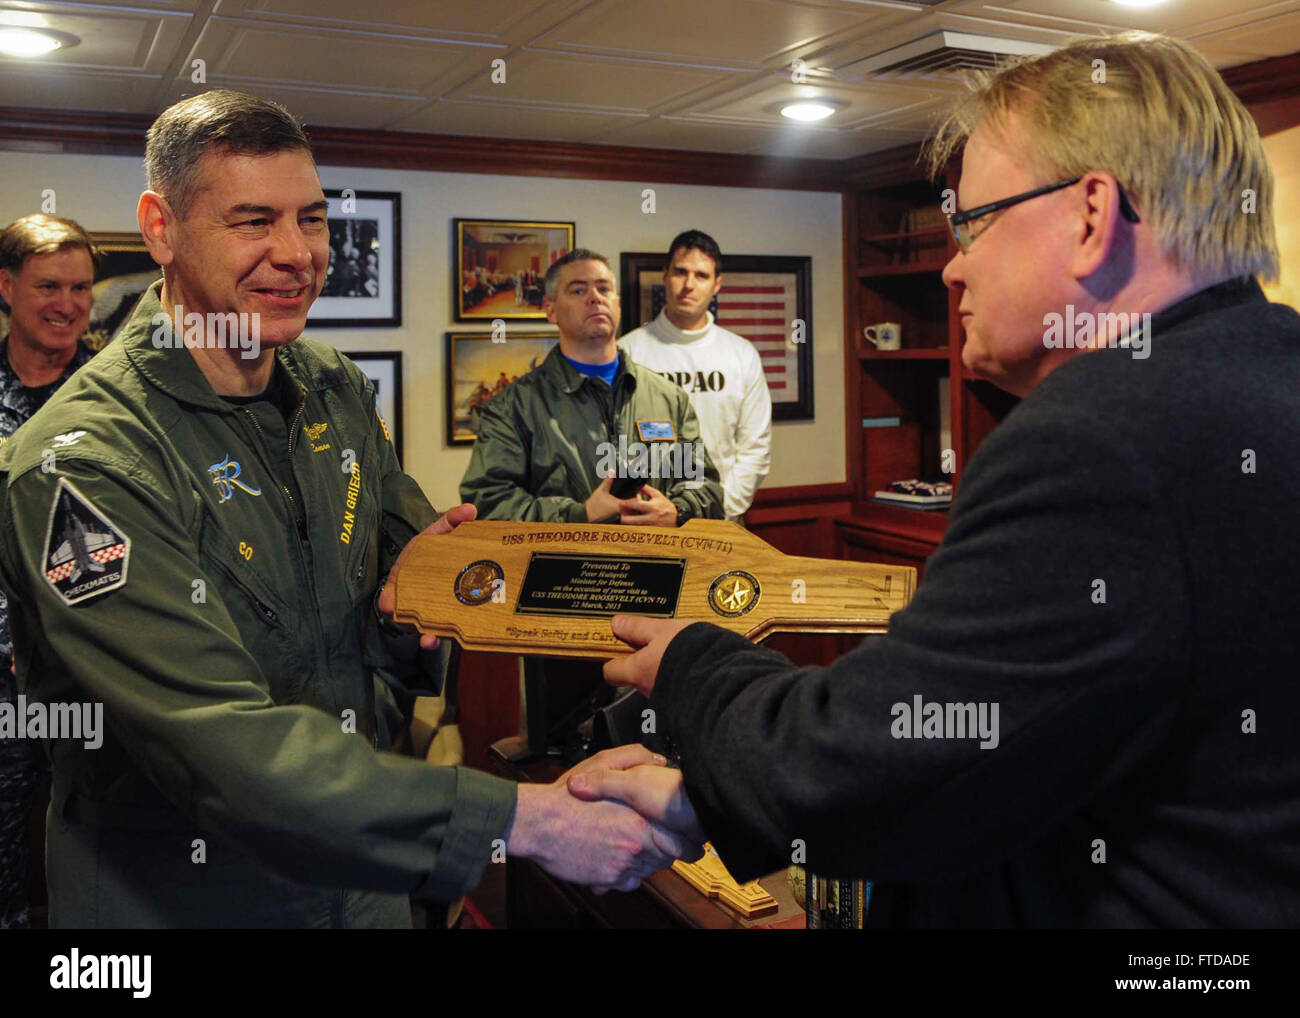 150322-N-ZZ999-034 ATLANTIC OCEAN (March 22, 2015)  Commanding Officer of the Nimitz-class aircraft carrier USS Theodore Roosevelt (CVN 71) Capt. Daniel Grieco, left, presents a token of appreciation to the Swedish Minister of Defence Peter Hultqvist aboard Theodore Roosevelt March 22, 2015. Theodore Roosevelt, homeported in Norfolk, is conducting naval operations in the U.S. 6th Fleet area of operations in support of U.S. national security interests in Europe. (U.S. Navy photo by Mass Communication Specialist Seaman Anthony Hopkins II/Released) Stock Photo